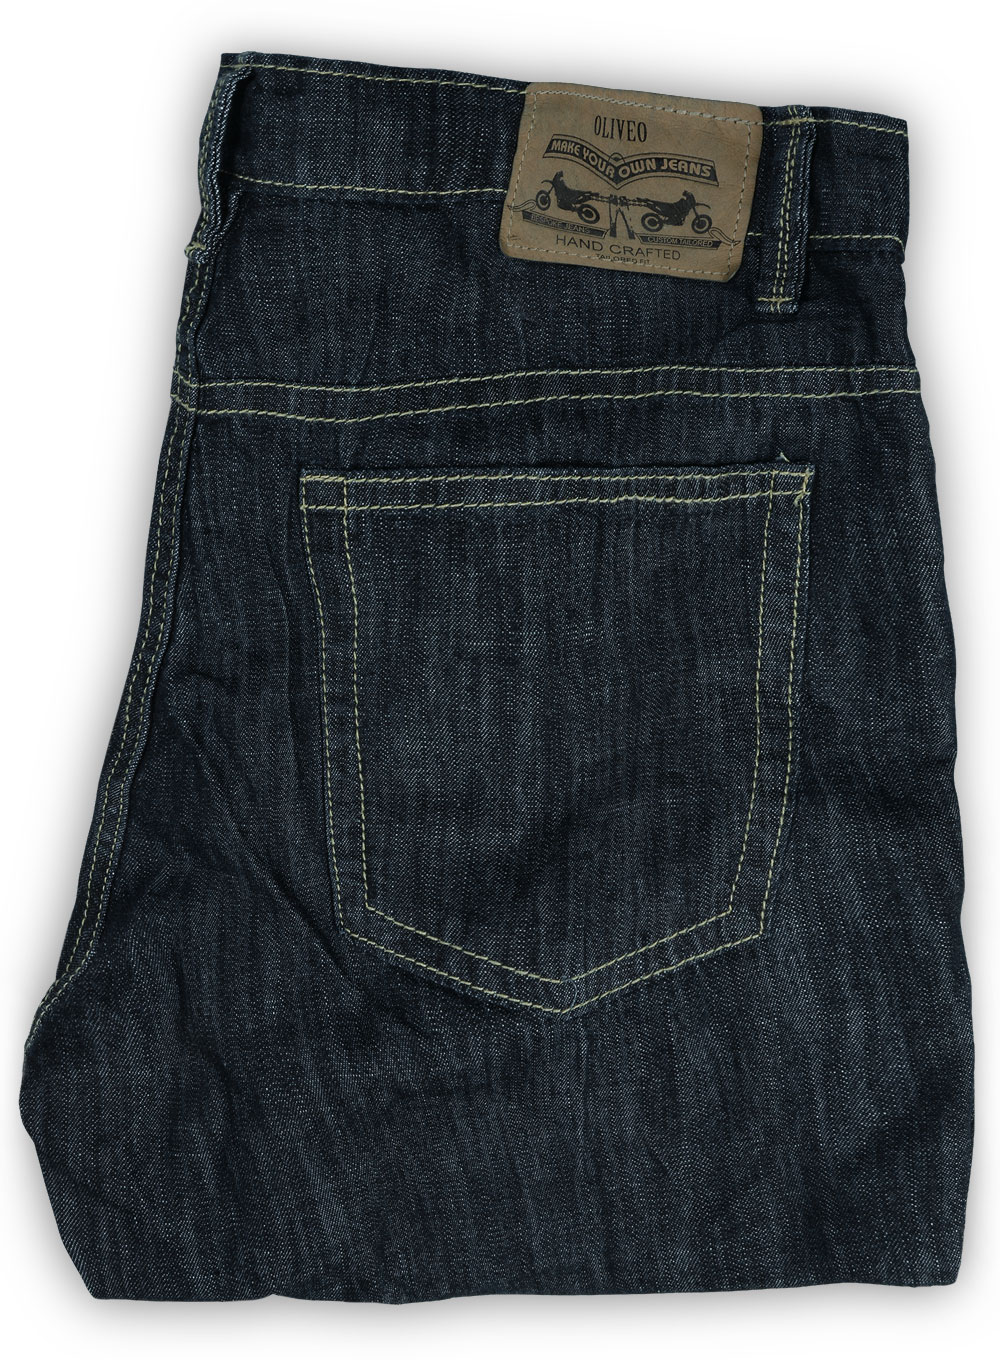 6oz Feather Light Weight Jeans - Hard Wash : Made To Measure Custom ...